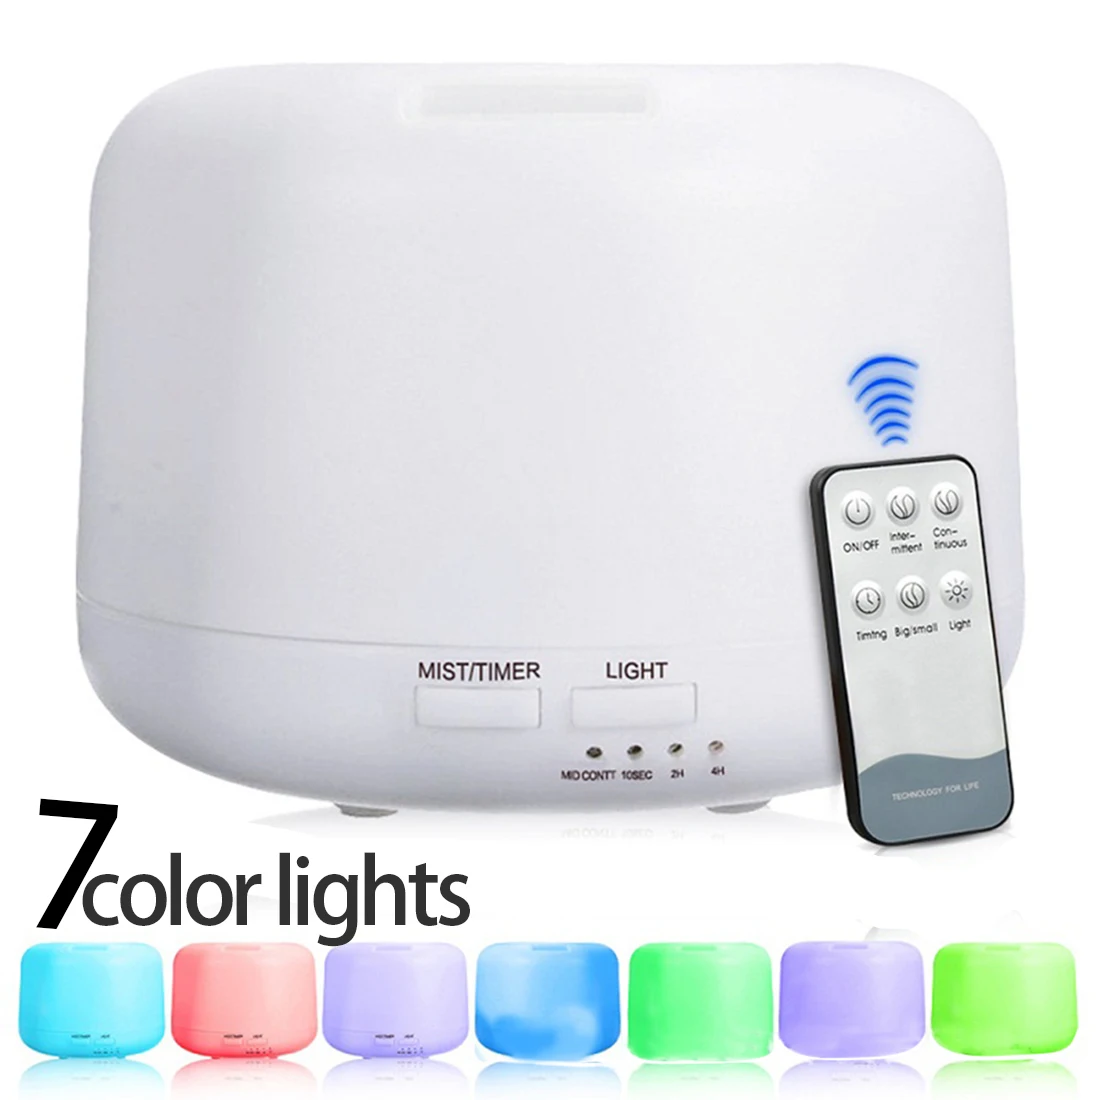 

300ml Aromatherapy Oil Diffuser Air Humidifier with 7 Color Changing LED Lights for Home Ultrasonic Mist Maker difusor de aroma